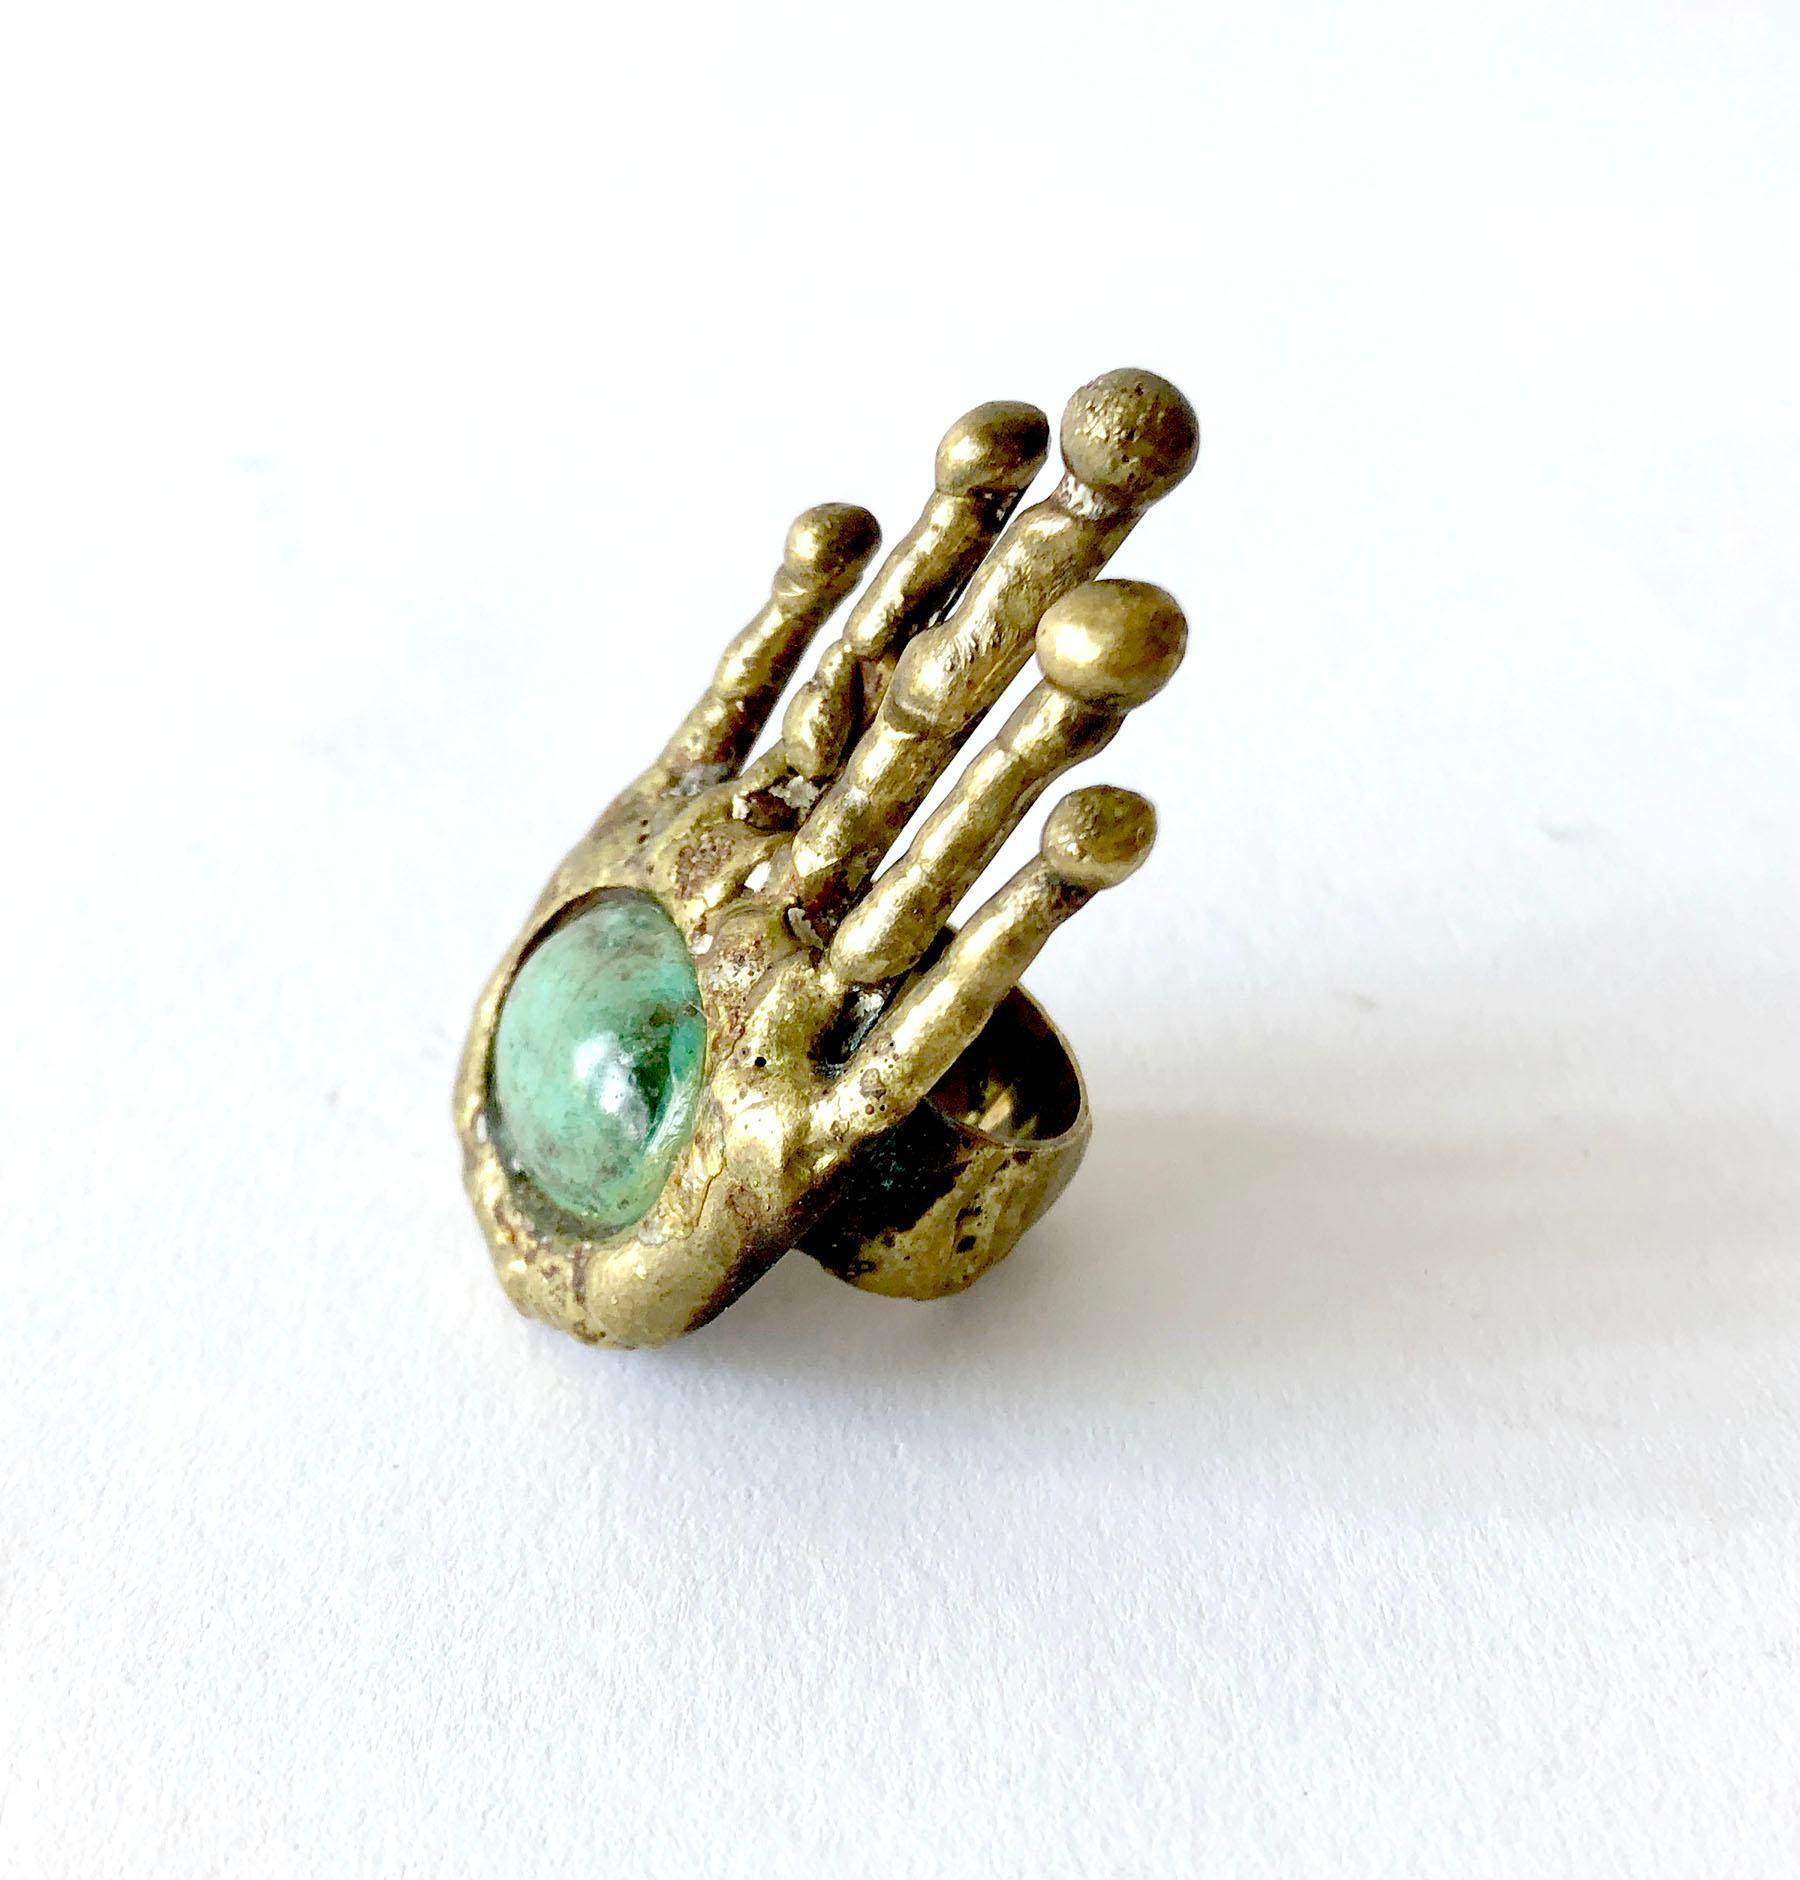 Surrealist bronze with Mexican turquoise accent hand ring by sculptor and jeweler Pal Kepenyes of Acapulco, Mexico.  Ring is a finger size 6.25.  Face of ring measures 2